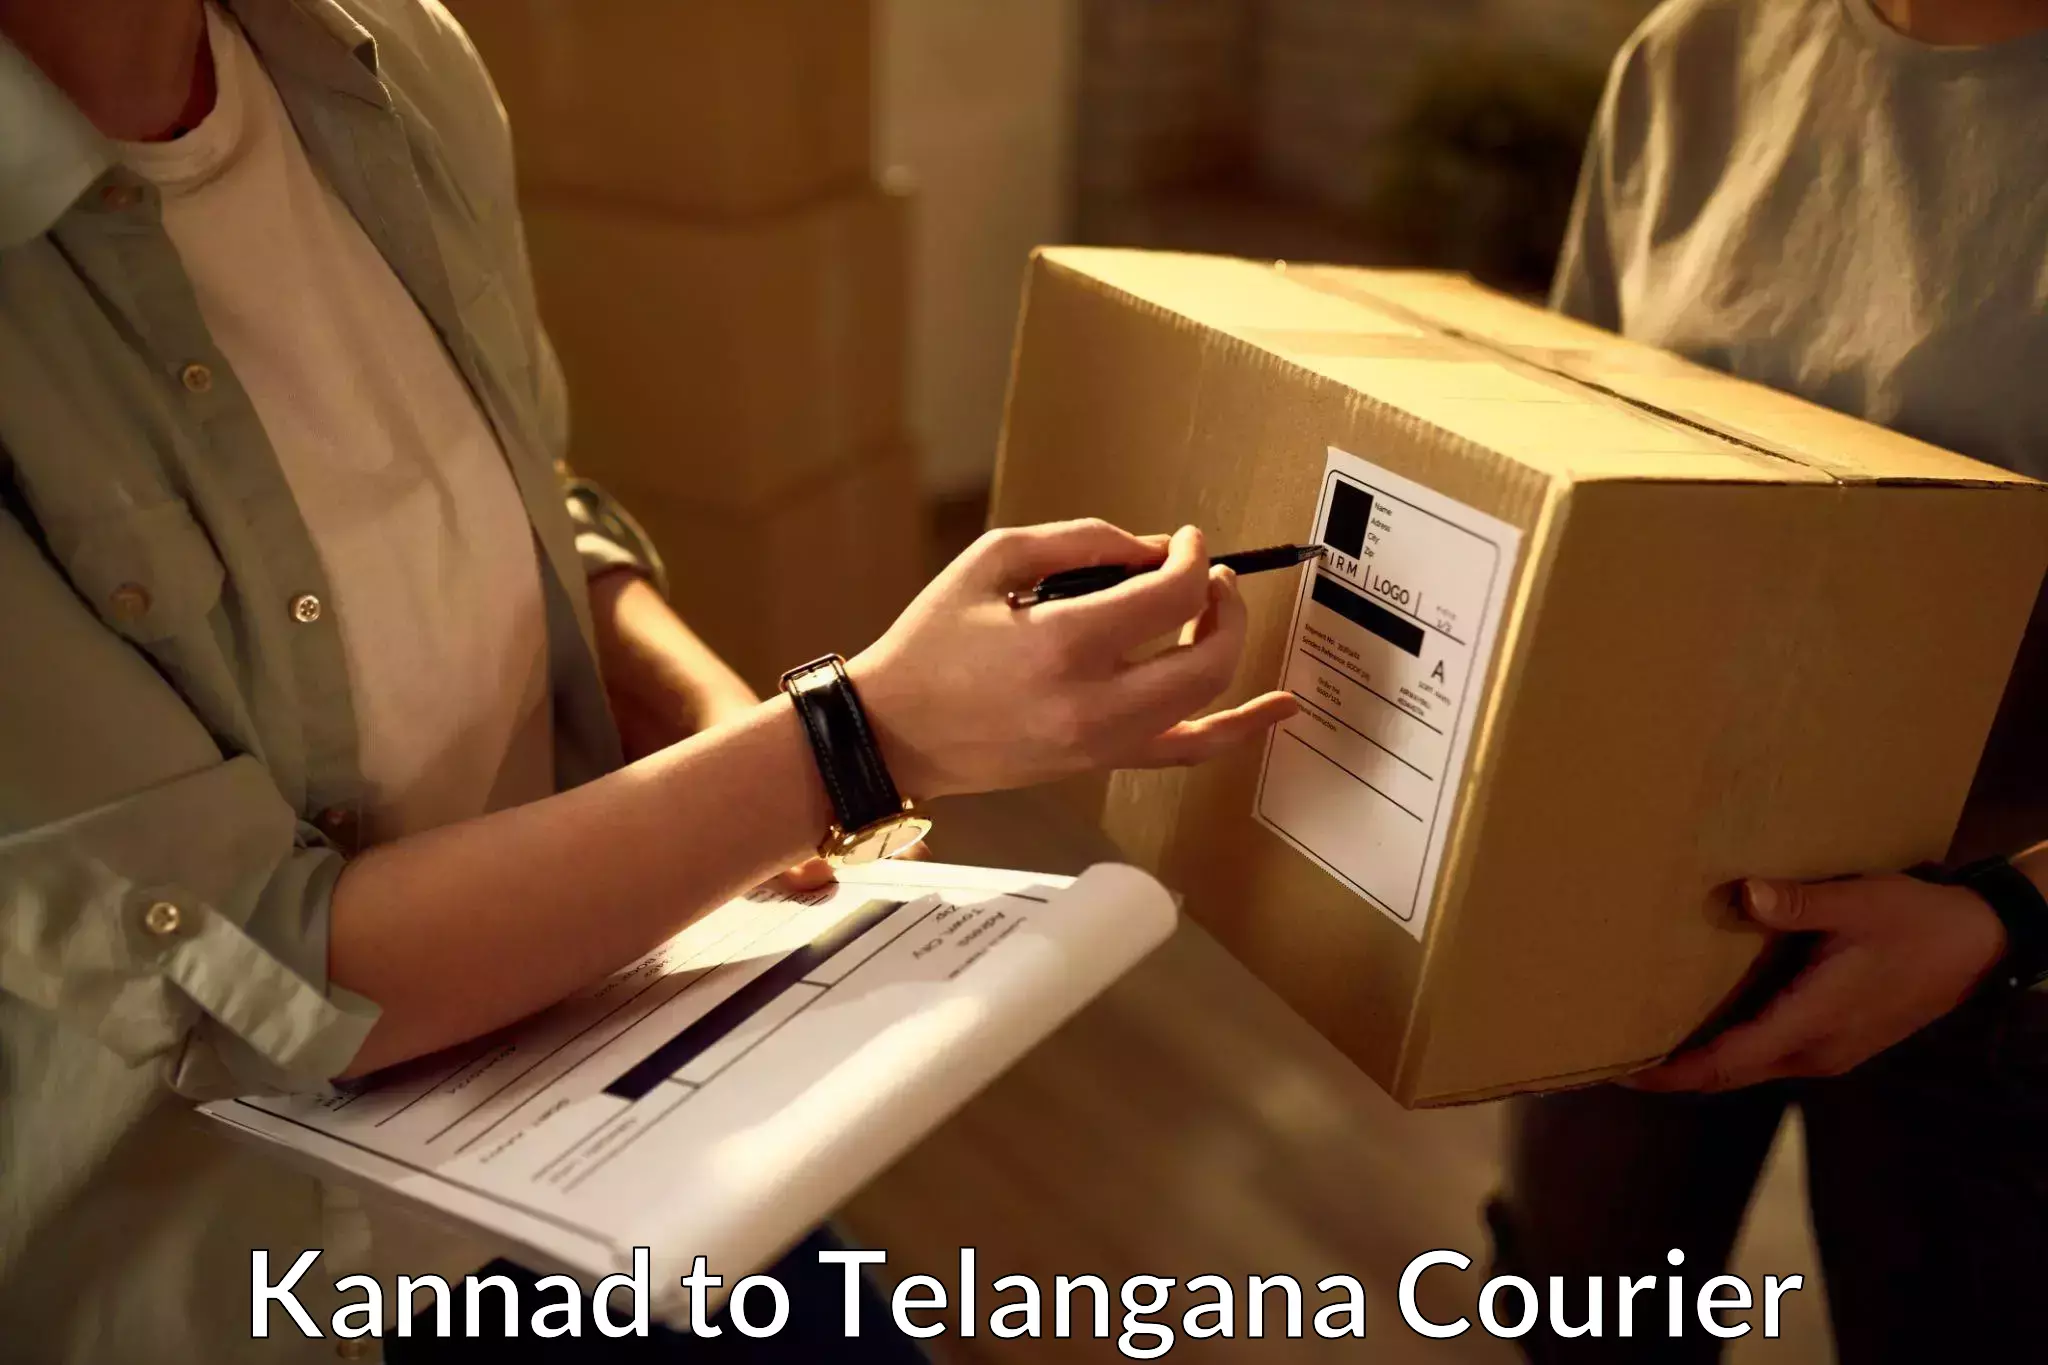 Specialized courier services in Kannad to Nizamabad